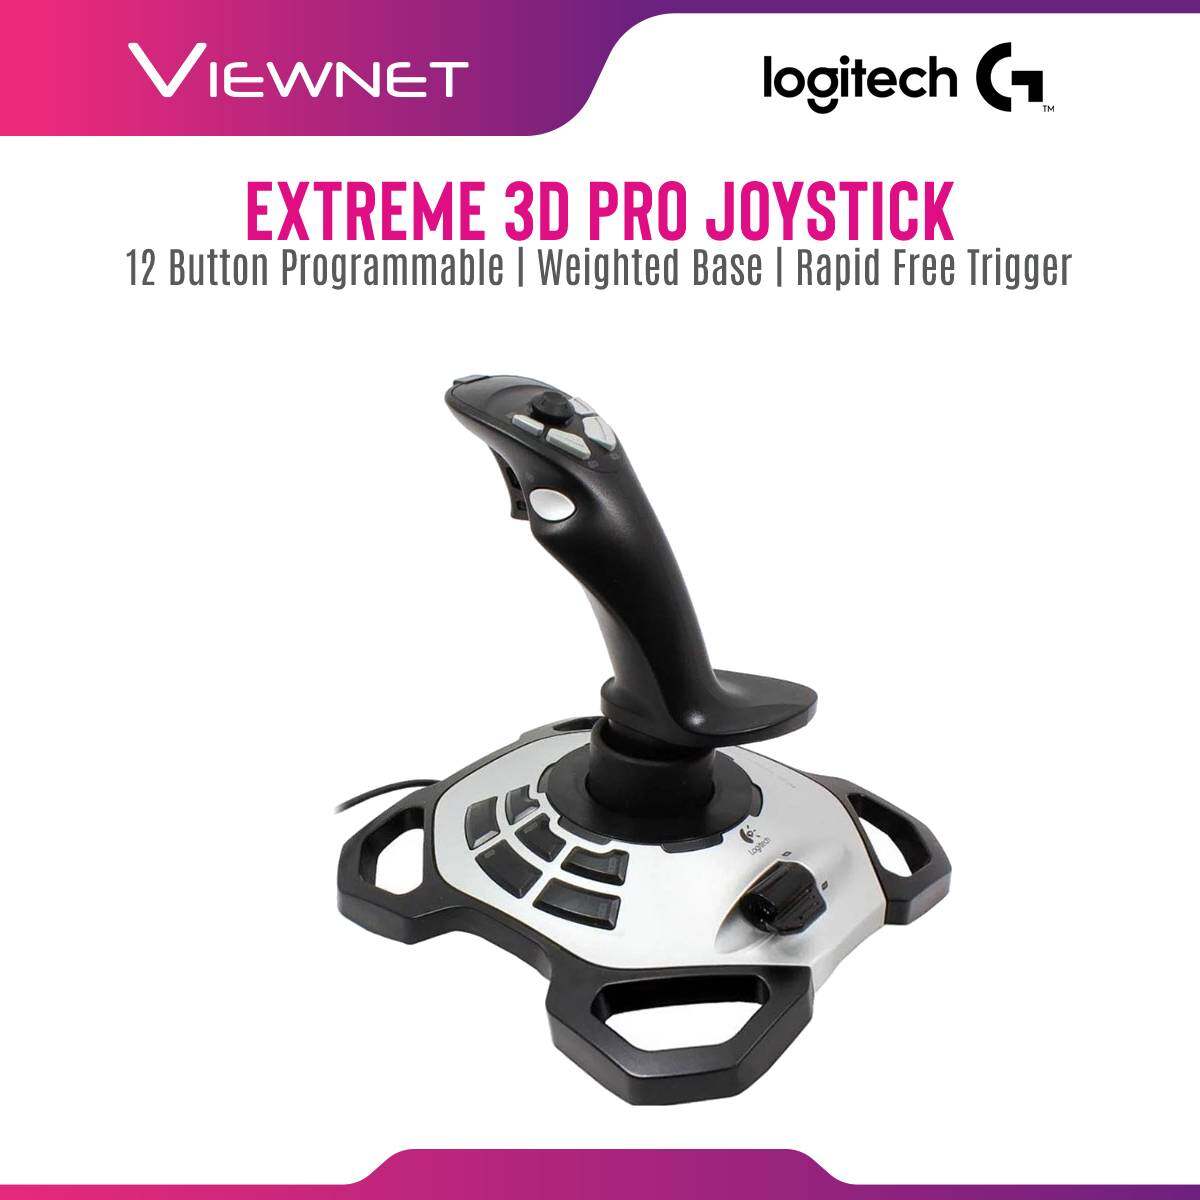 Logitech Extreme 3D Pro Joystick (942-000008) with Twist Rudder Control, 12 Buttons Programmable, 8-Way Hat Switch, Rapid Fire Trigger, Stable Weighted Base | Lazada